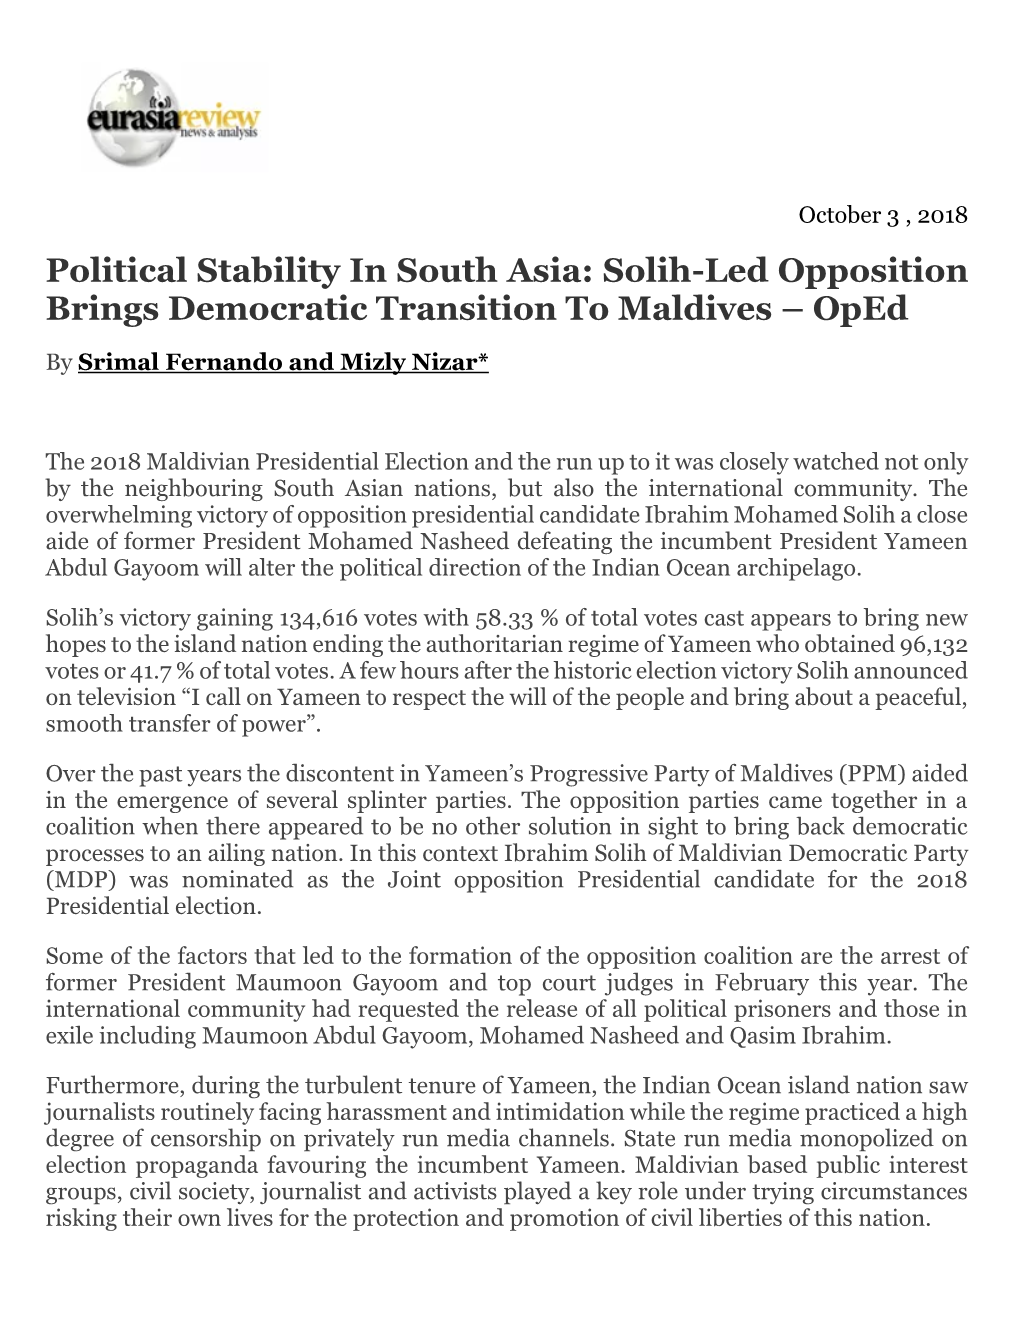 Political Stability in South Asia: Solih-Led Opposition Brings Democratic Transition to Maldives – Oped